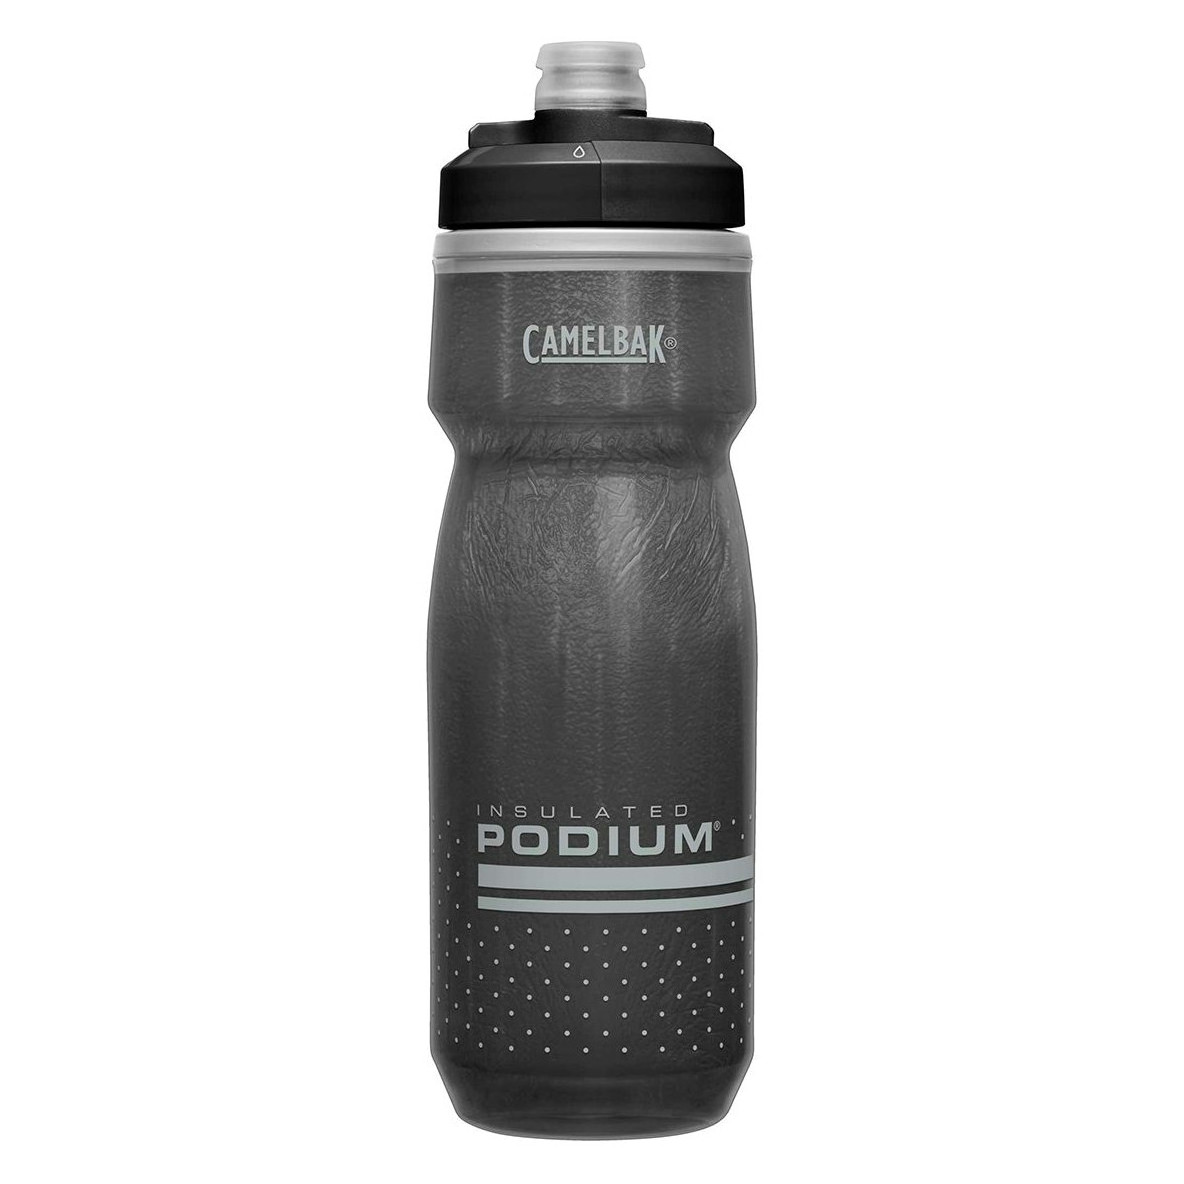 Fabric bouteille Gripper Insulated Thermo Porte-bouteille eau vélo 550 ml 